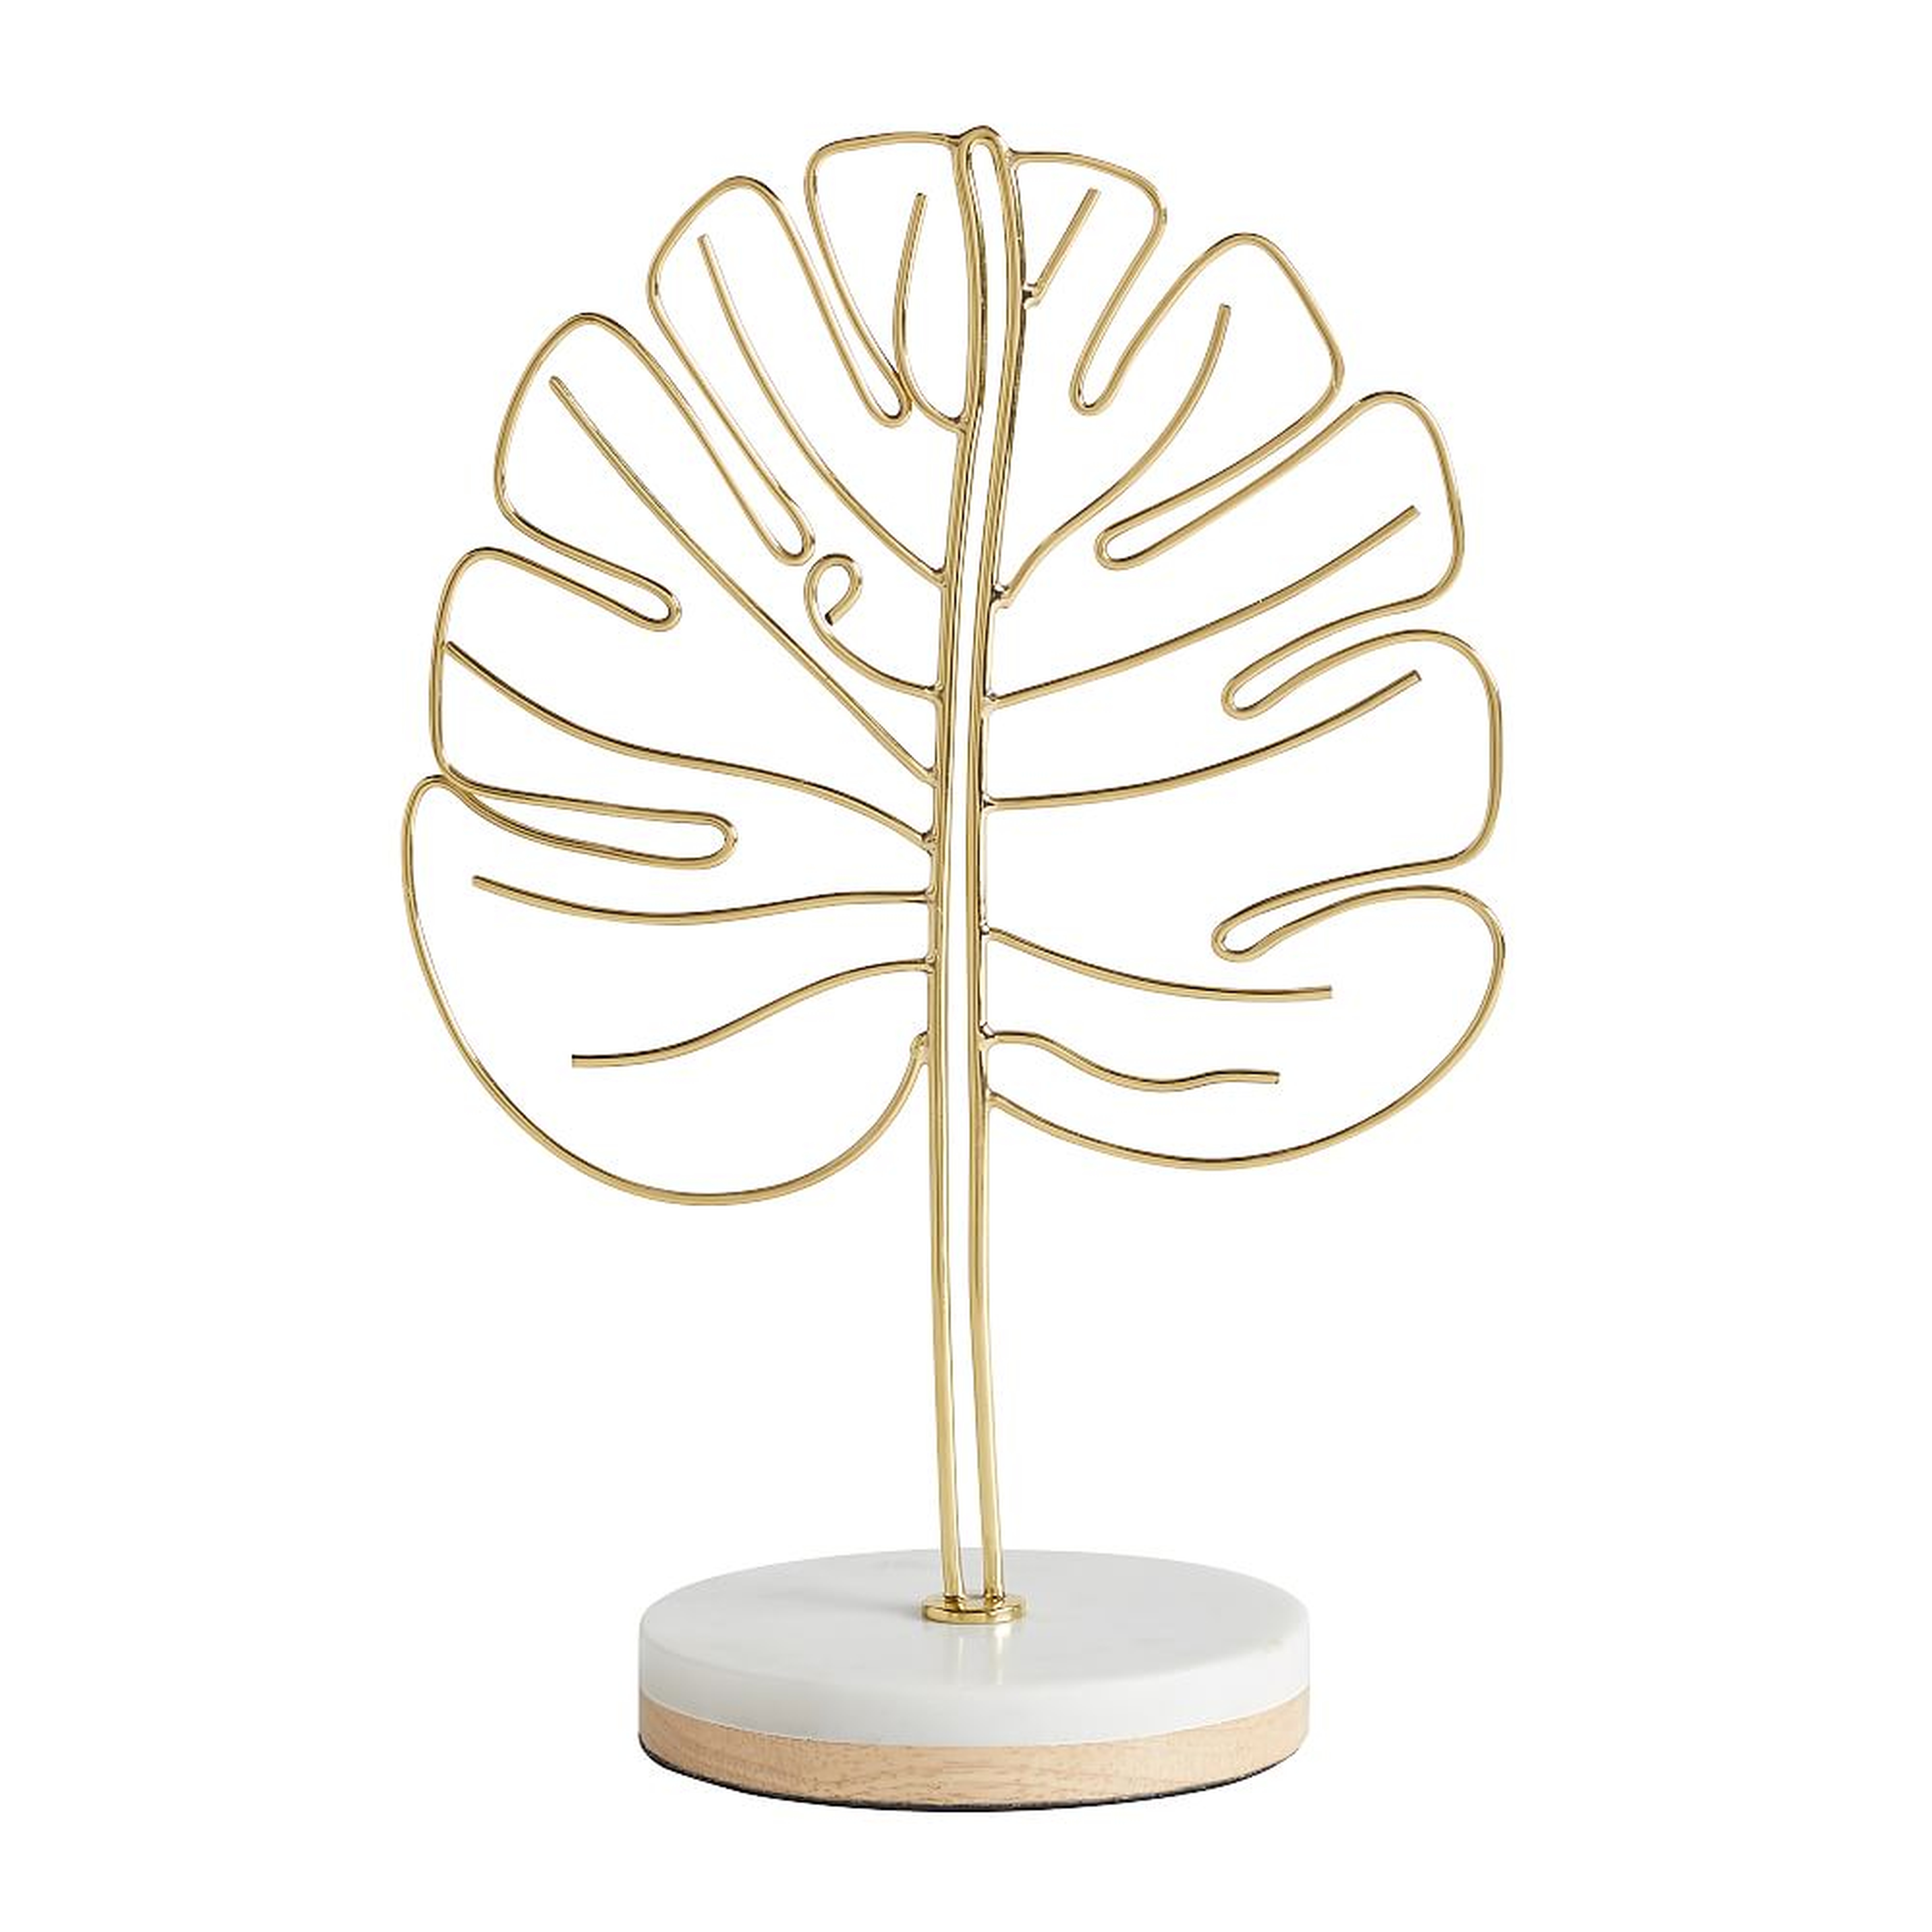 Marble Desk Accessories, Photo Display Leaf, White/Gold - Pottery Barn Teen